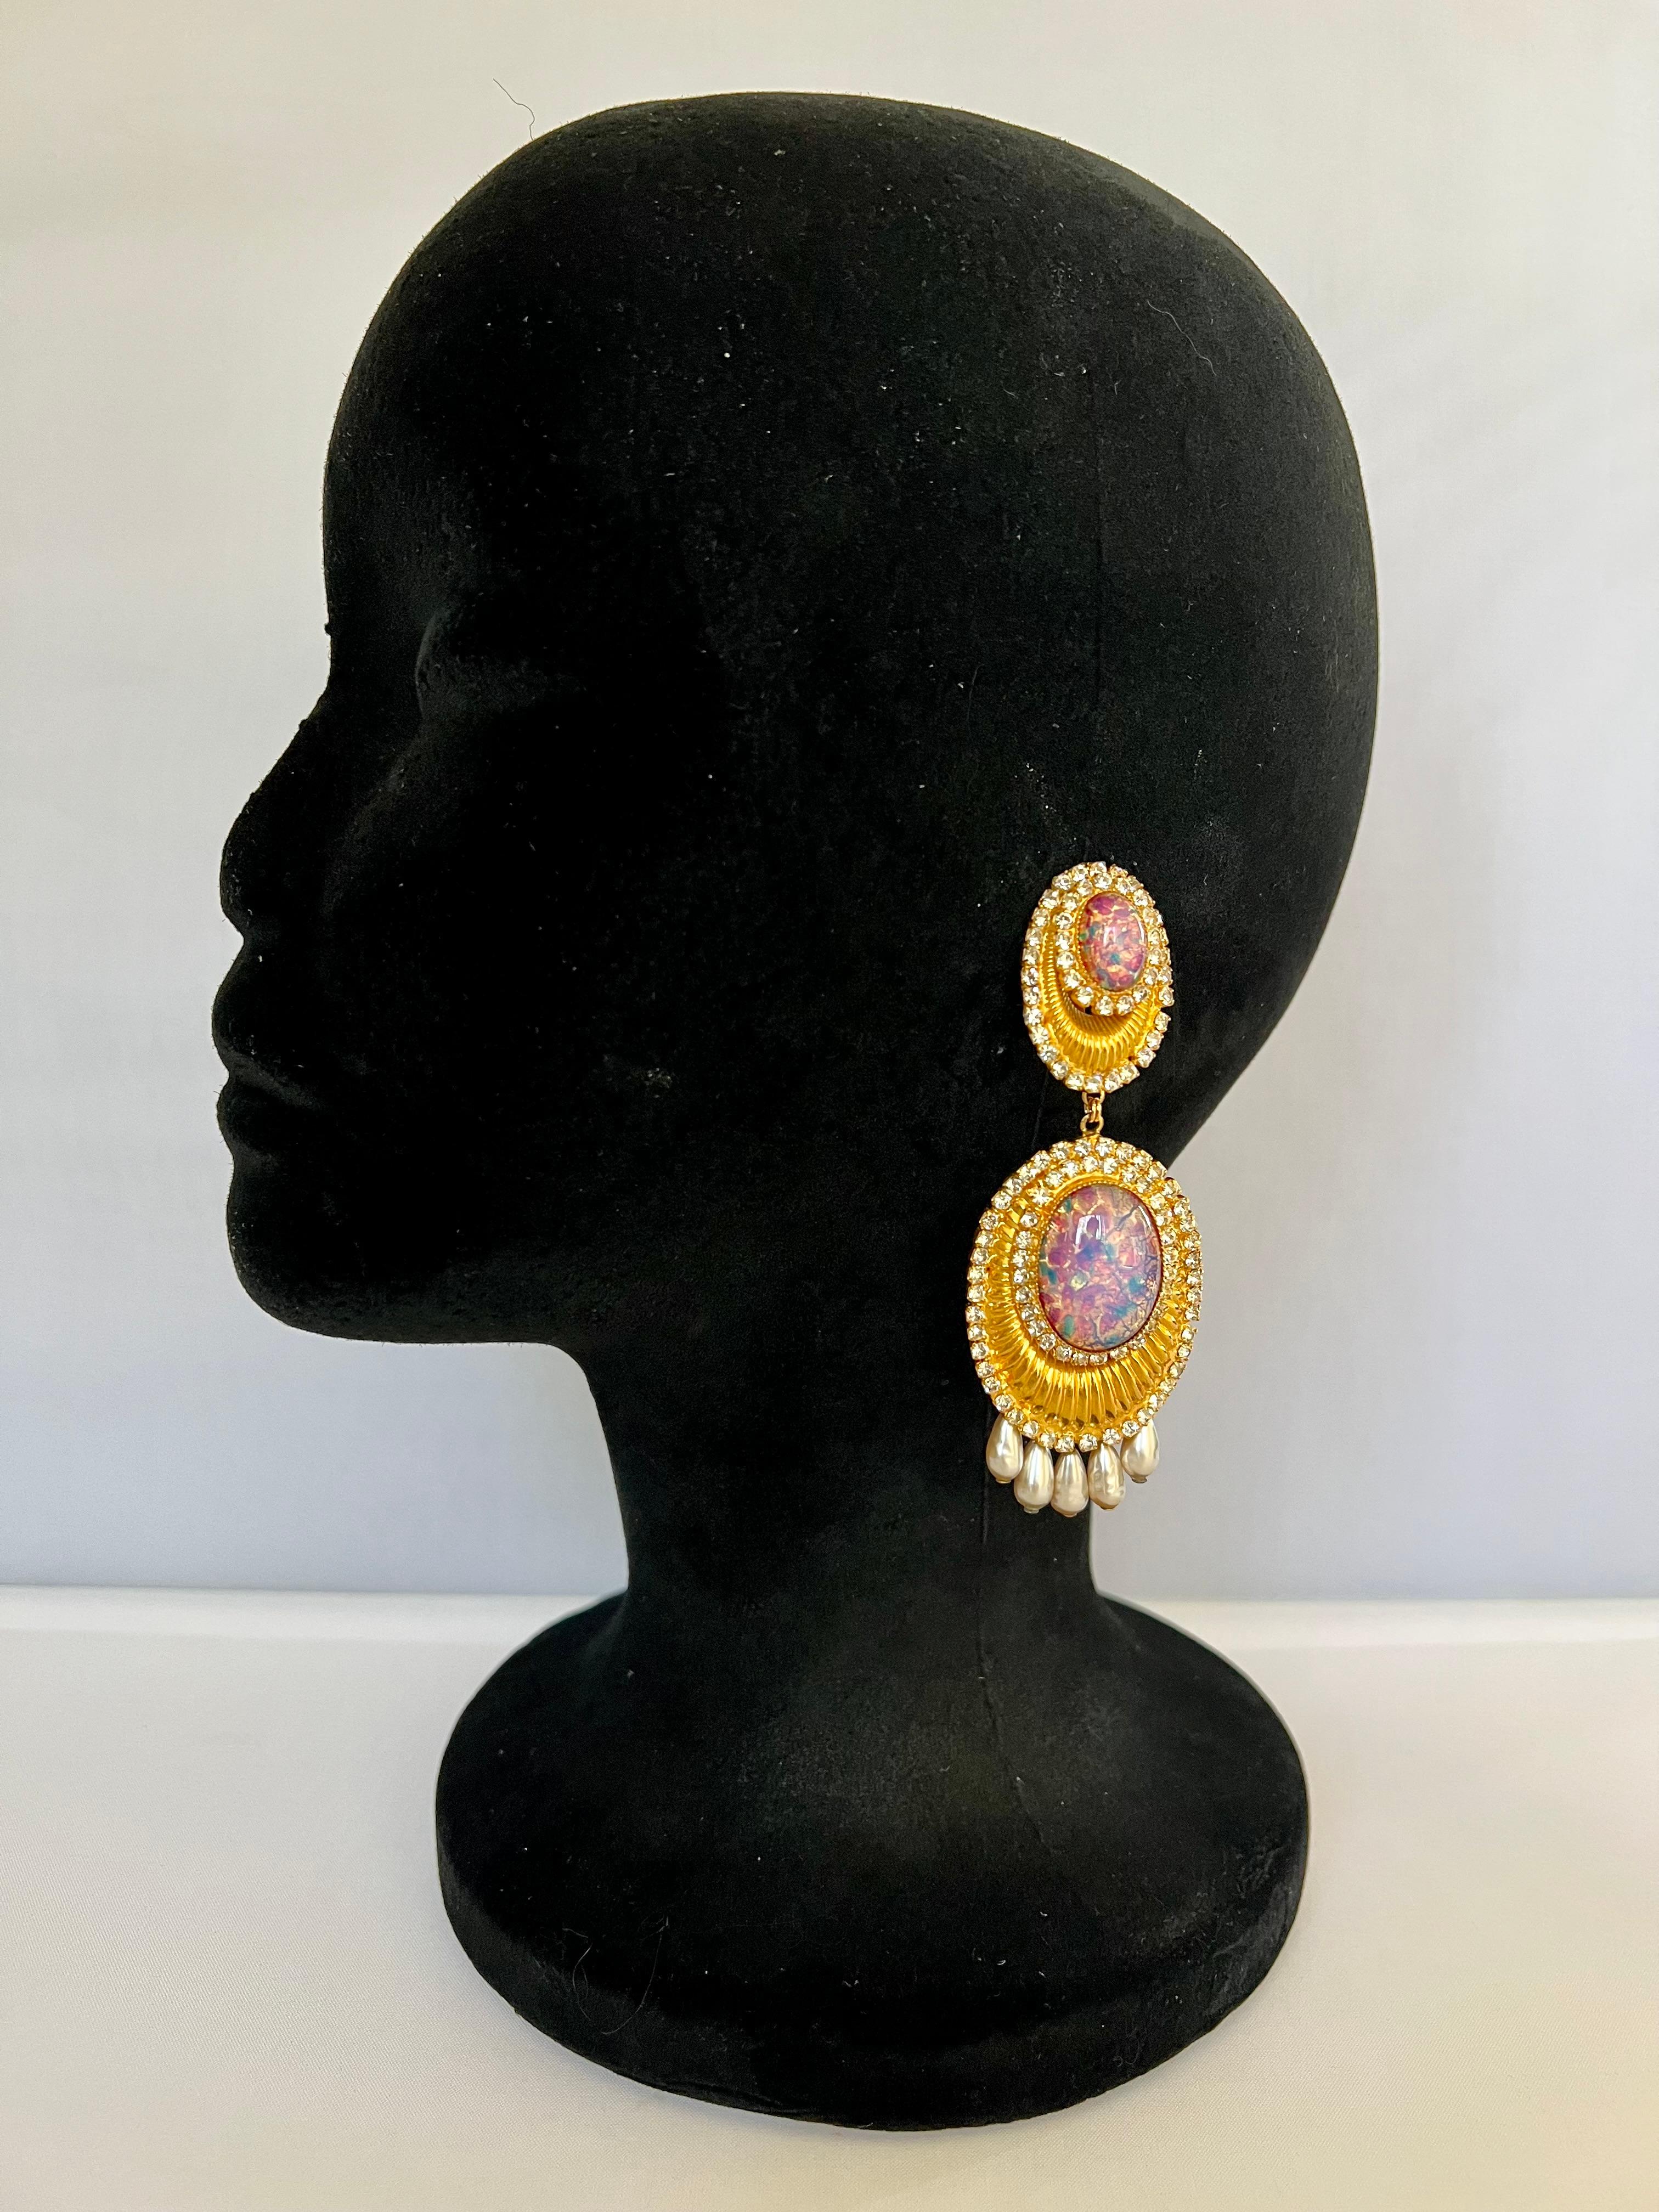 Vintage scarce clip-on statement earrings, comprised out of textured gilt metal (14k gold electroplated), adorned by diamante rhinestones, faux glass opals, and faux French glass pearls. Signed William de Lillo, made in 1969.